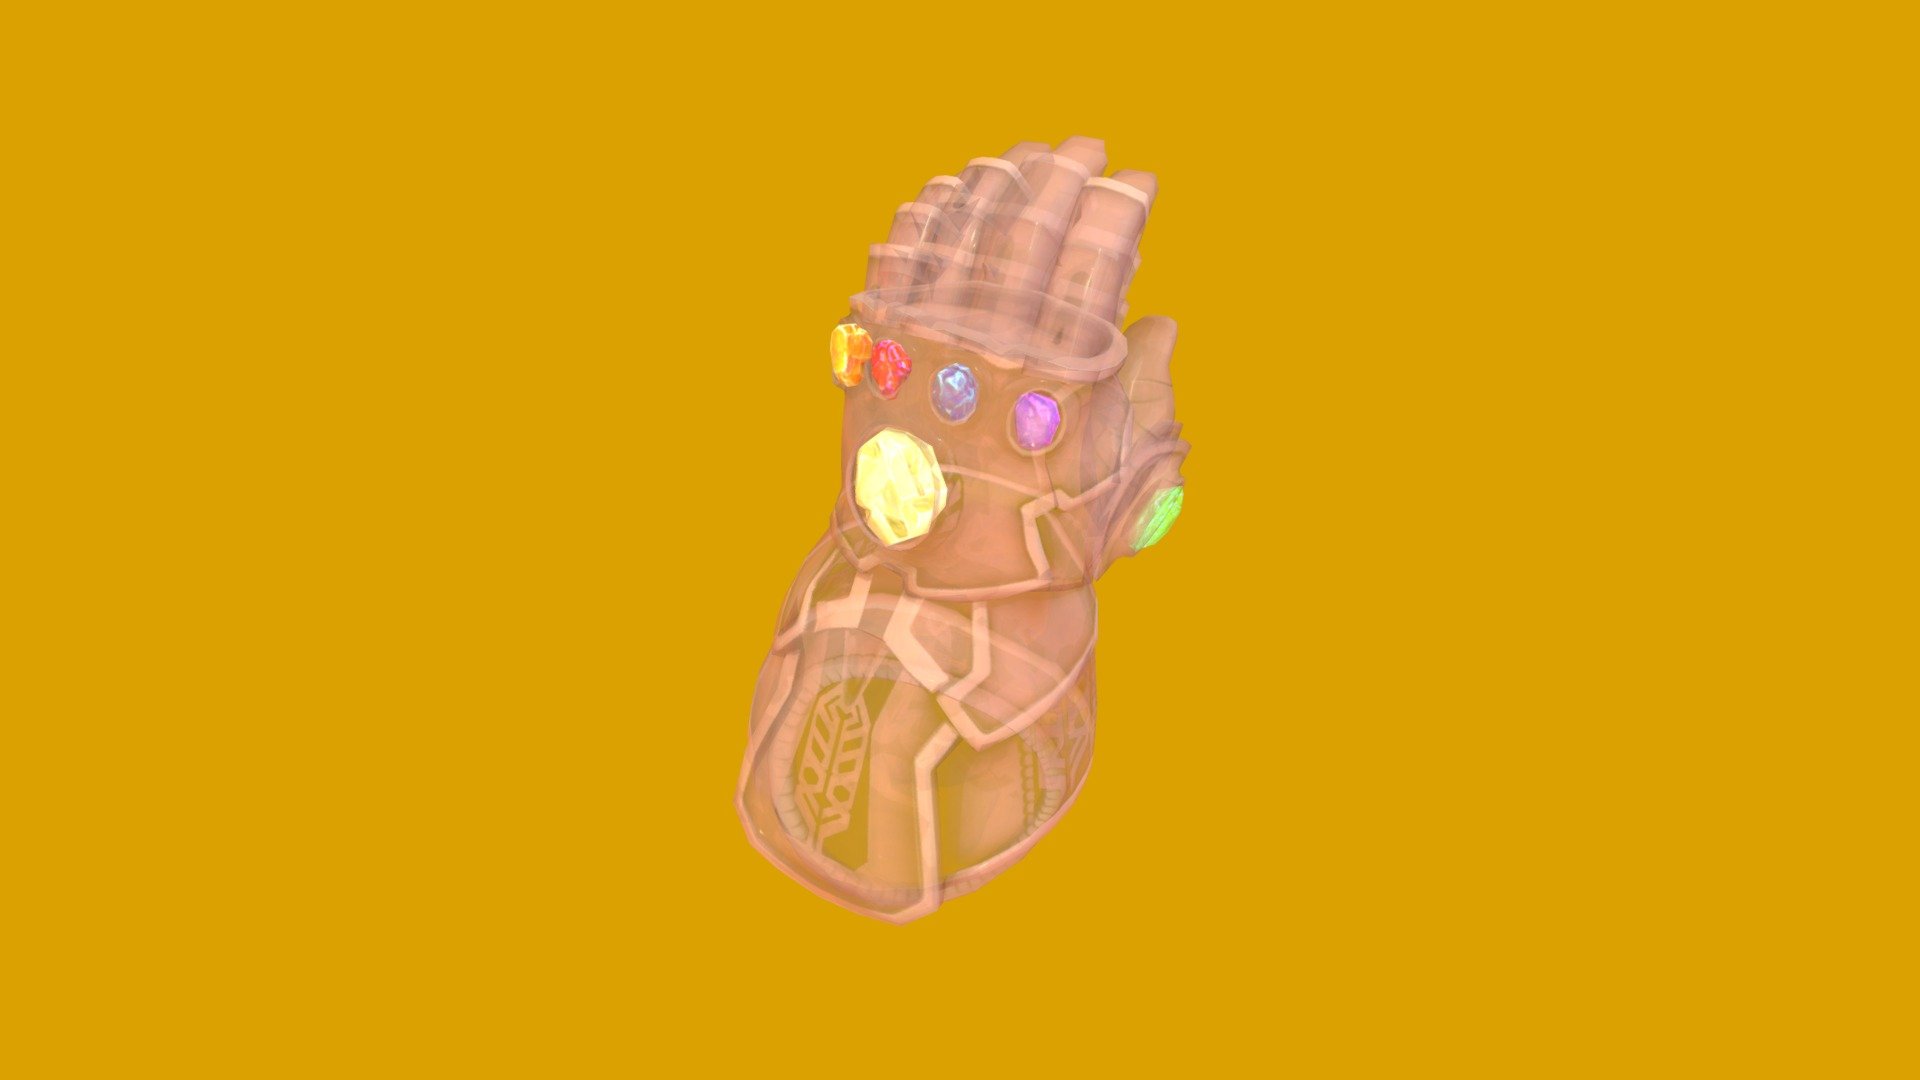 The Ultimate Thanos Infinity Gauntlet

With All 6 Stones 

This Was Downloadable When It Was Uploaded

But Then I Snapped 

It Became Undownloadable

So You Can Still See It, Preview It Or See it In AR Or VR - Infinity Guantlet - 3D model by EpicTGC 3d model